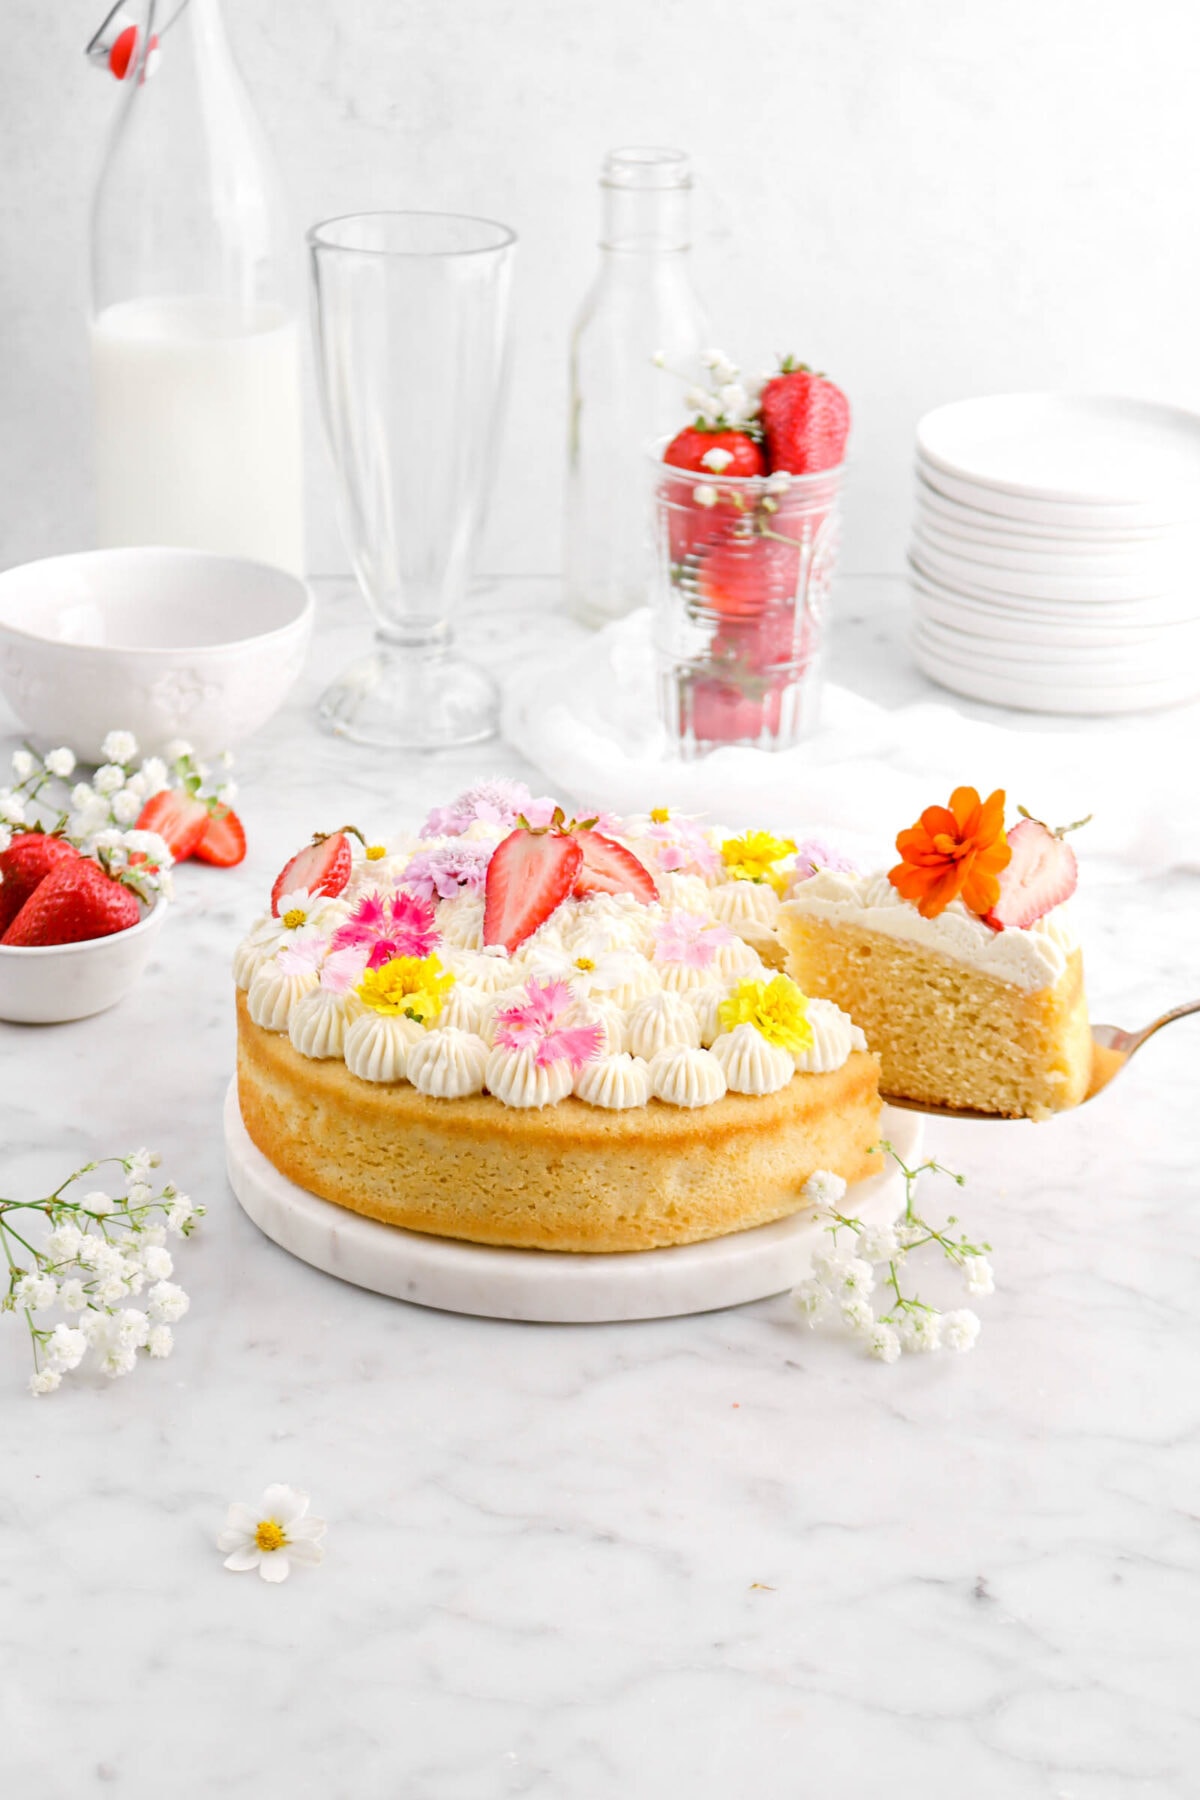 chamomile cake with slice being held by cake knife beside, with frosting on top, flowers, and strawberry halves